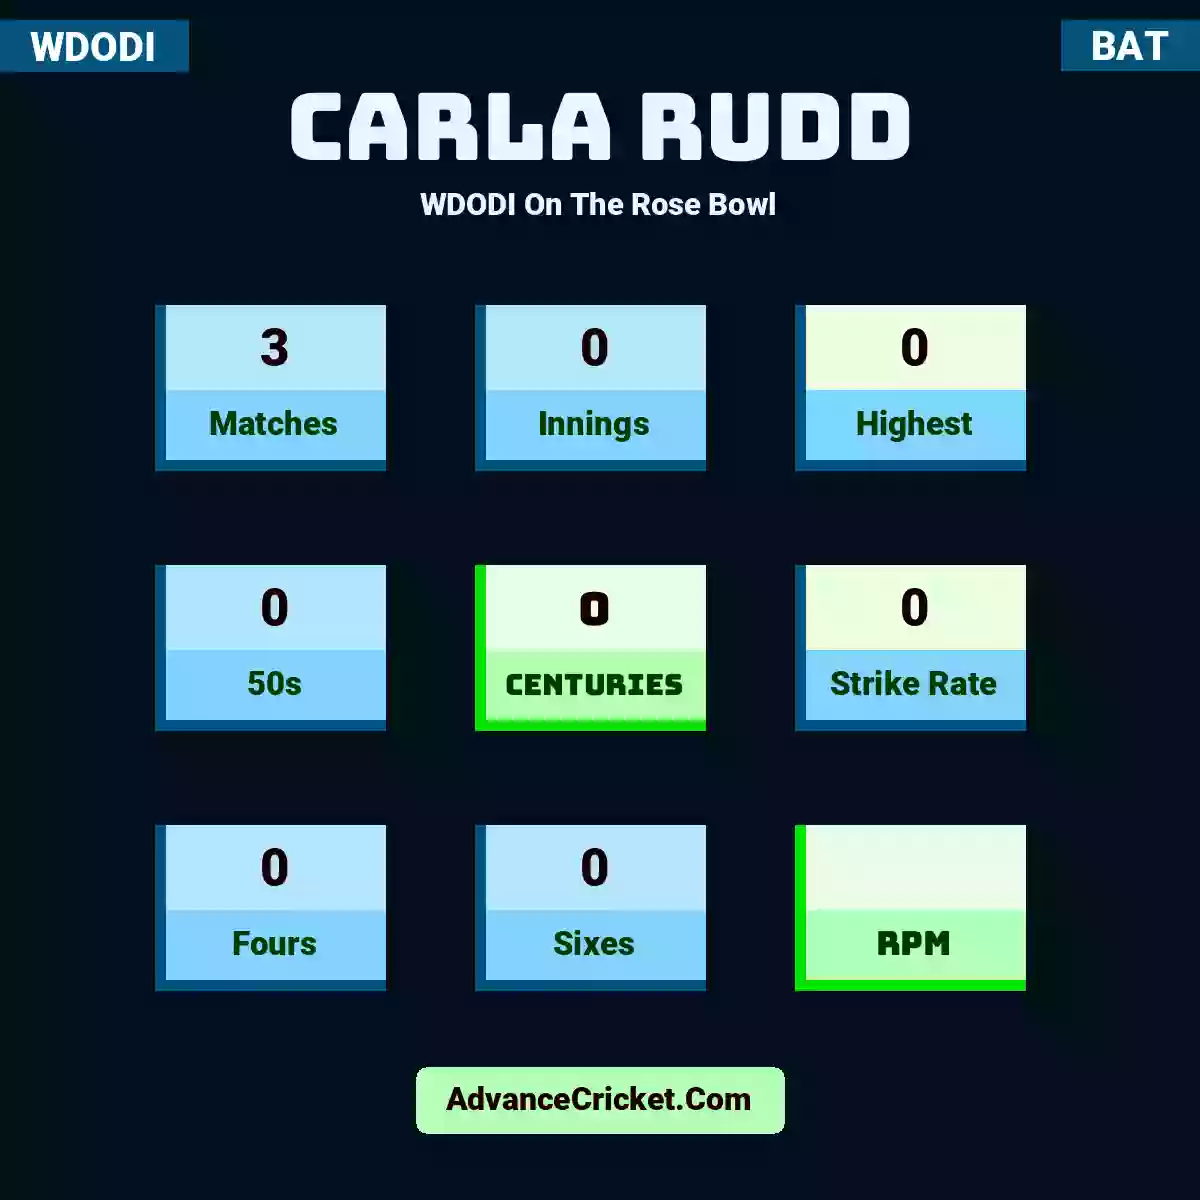 Carla Rudd WDODI  On The Rose Bowl, Carla Rudd played 3 matches, scored 0 runs as highest, 0 half-centuries, and 0 centuries, with a strike rate of 0. C.Rudd hit 0 fours and 0 sixes.